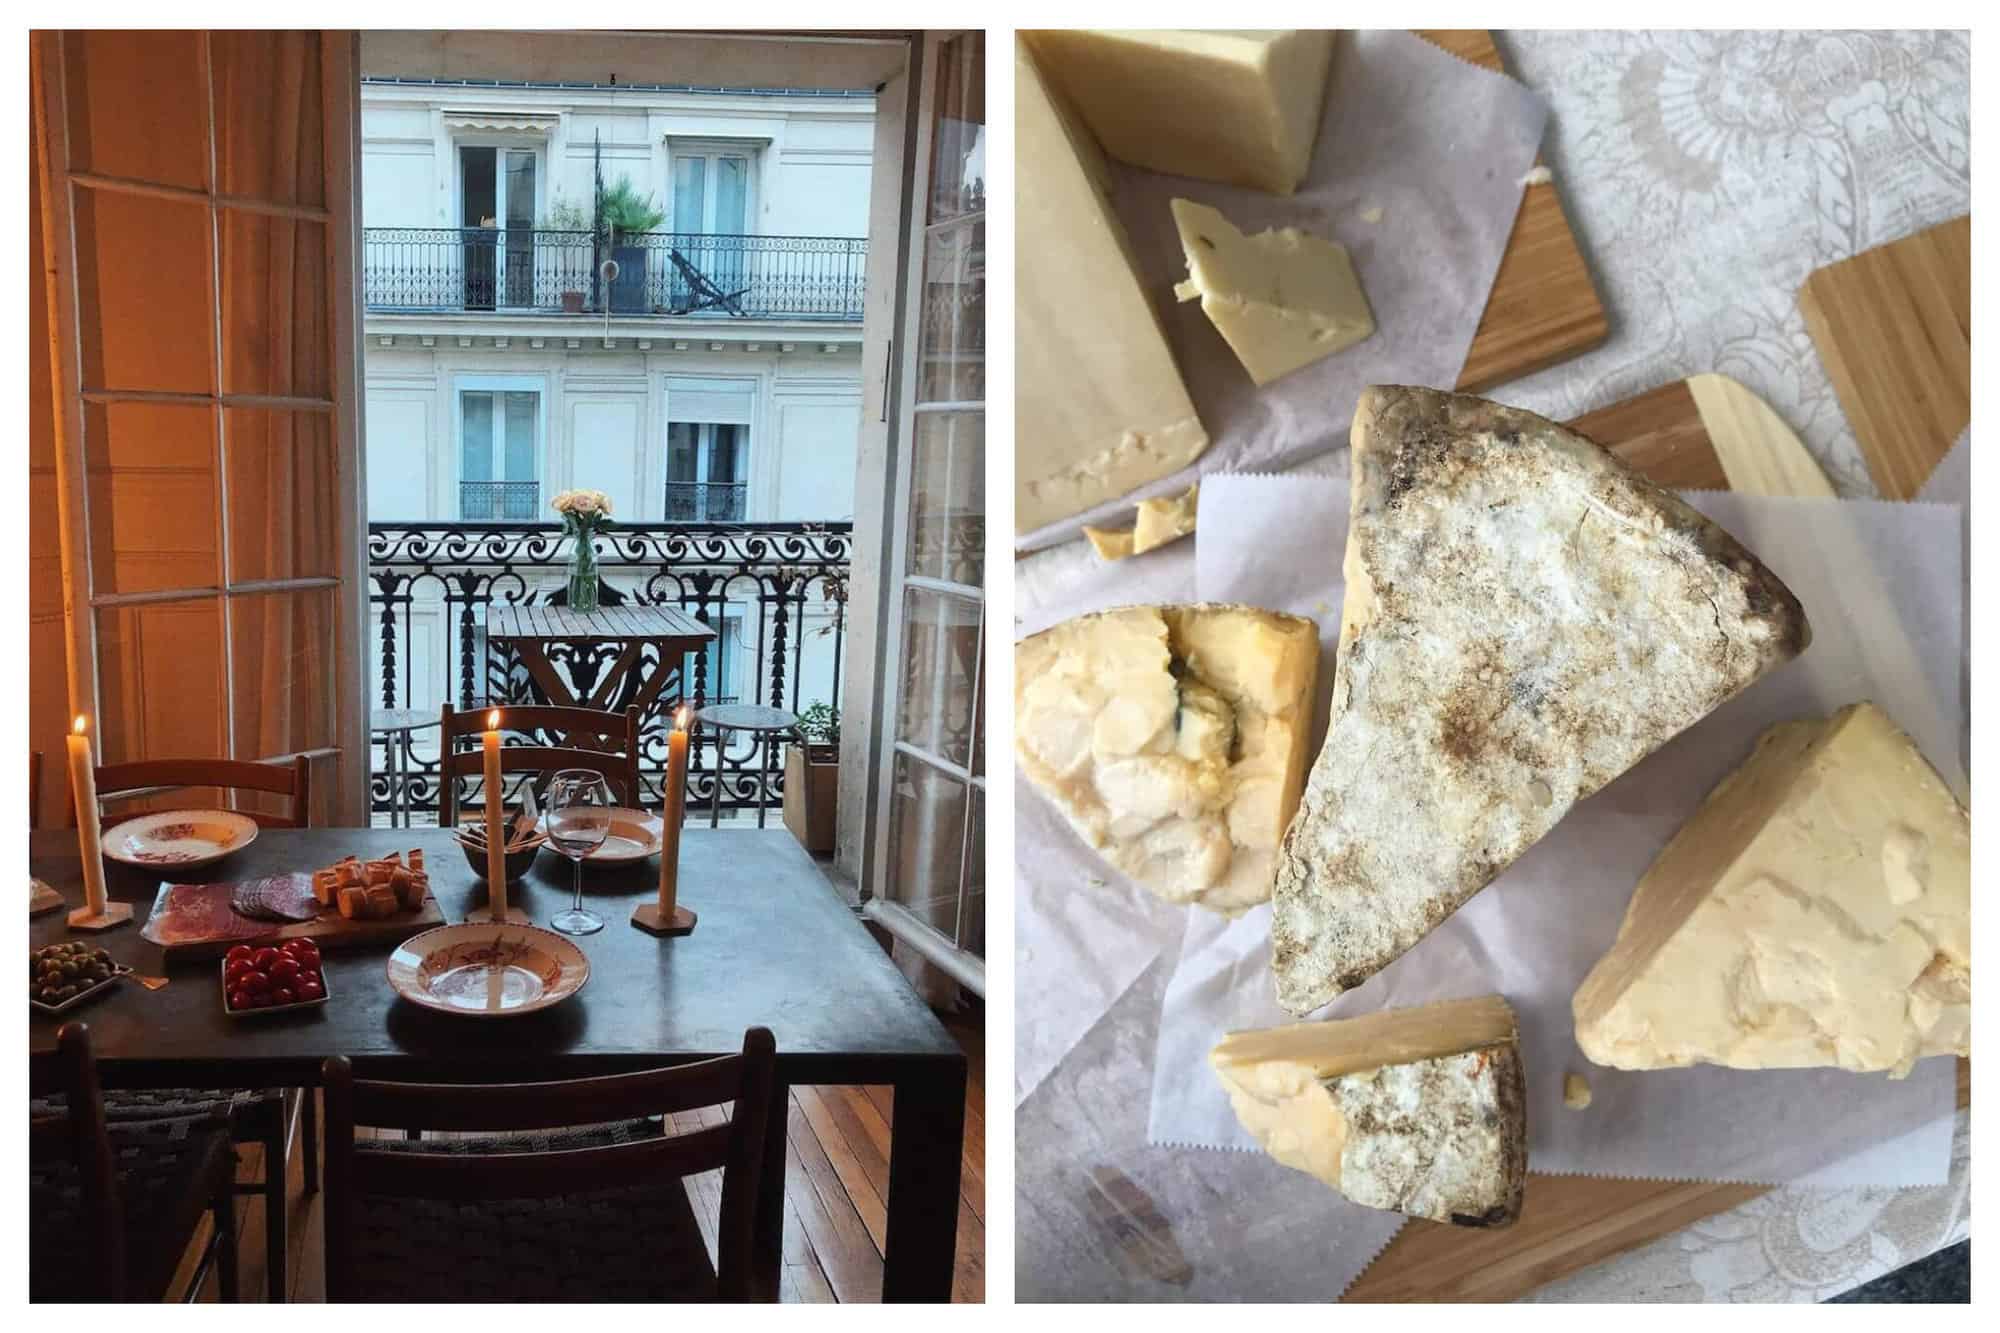 Left: a table set with plates, candles, a wine glass and food with a large window overlooking Paris in the background. Right: several pieces of cheese on a cutting board as seen from above.  